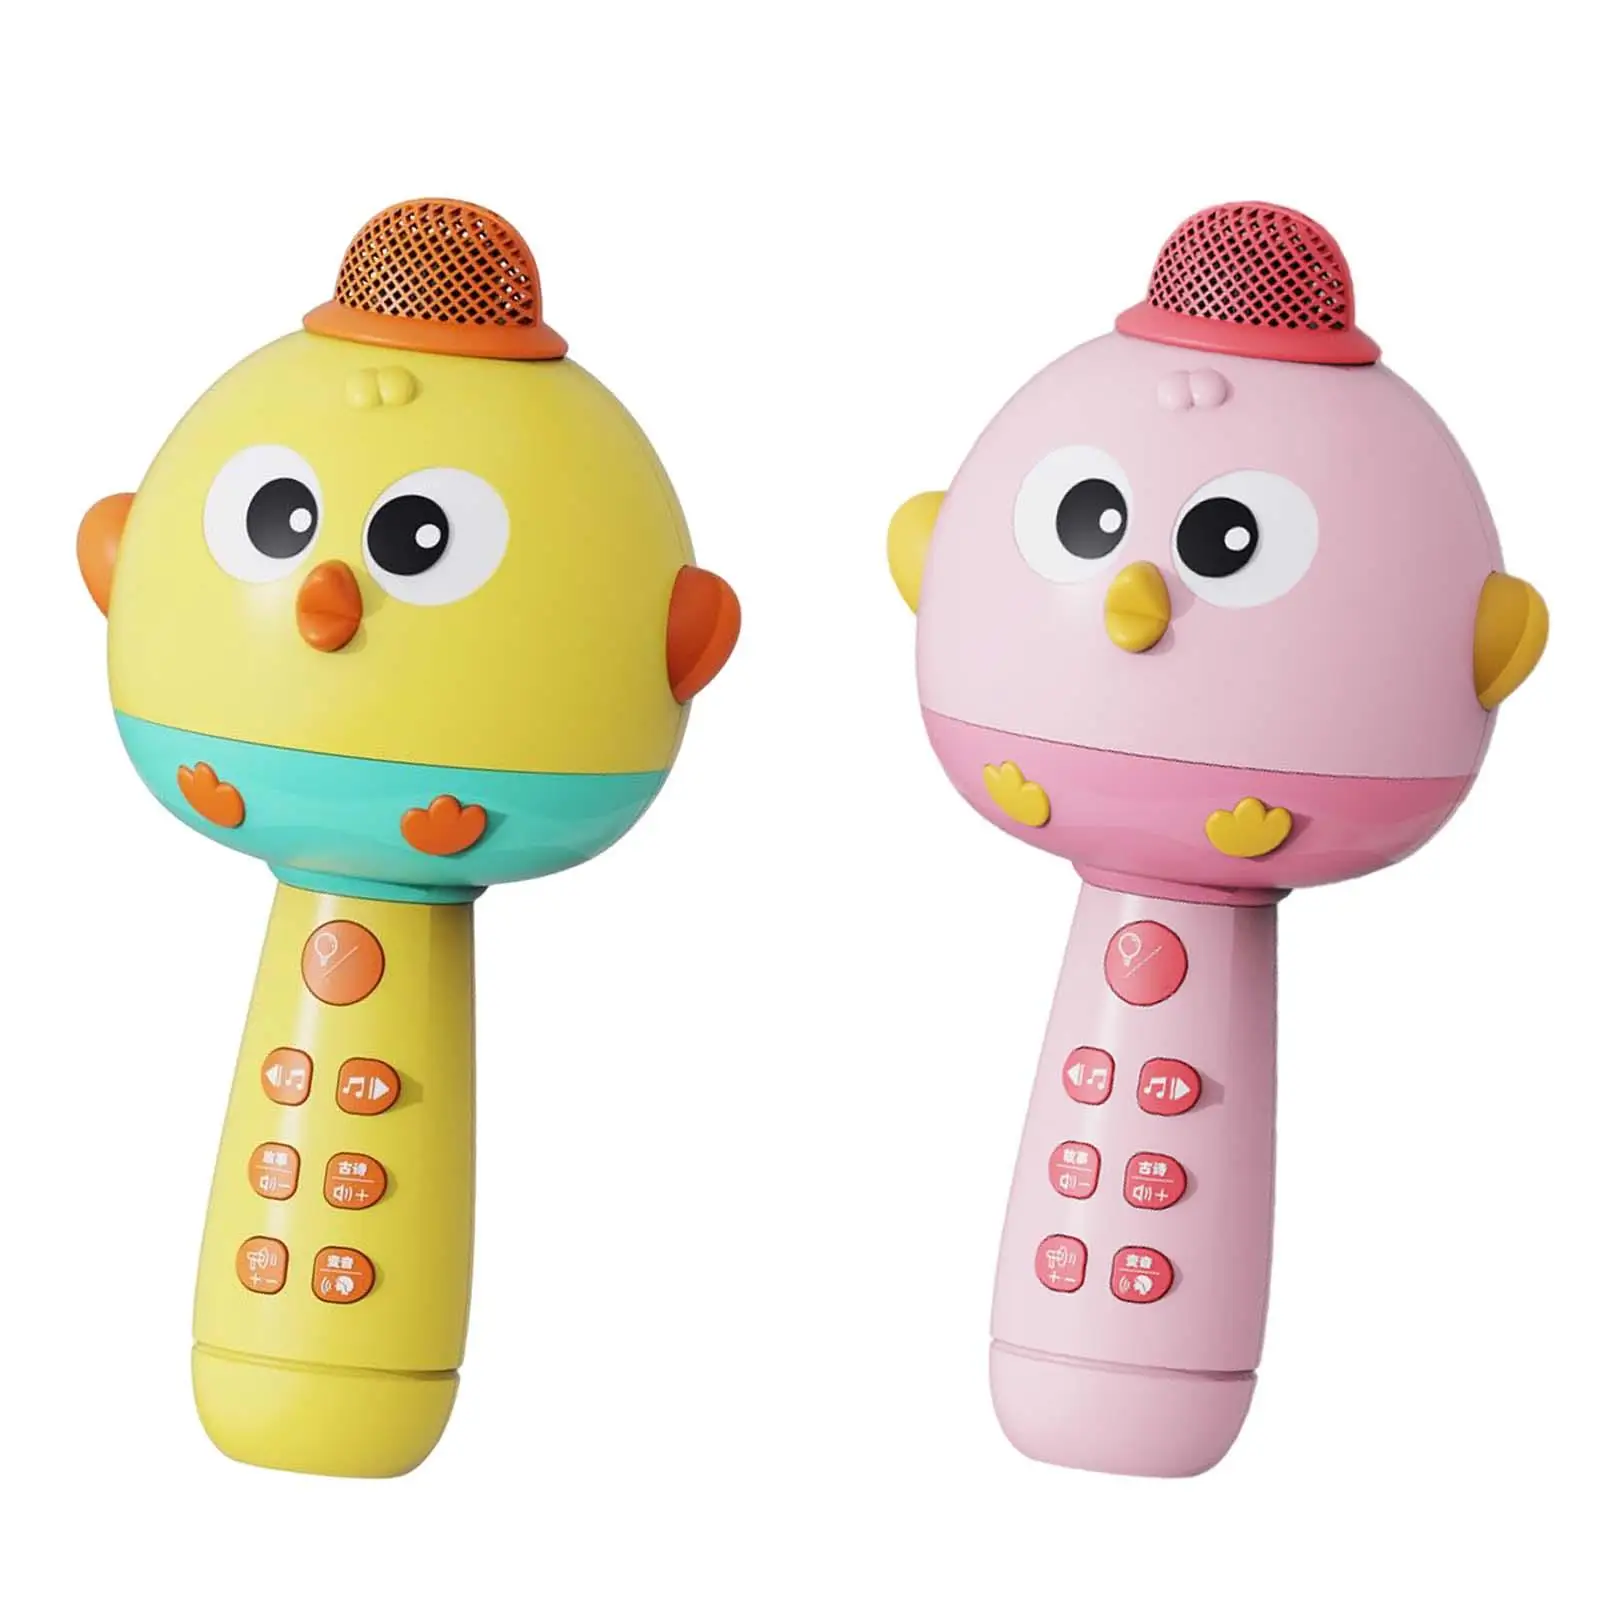 Kids karaoke microphones Machine Toy Multiple Sound Effects for Gathering